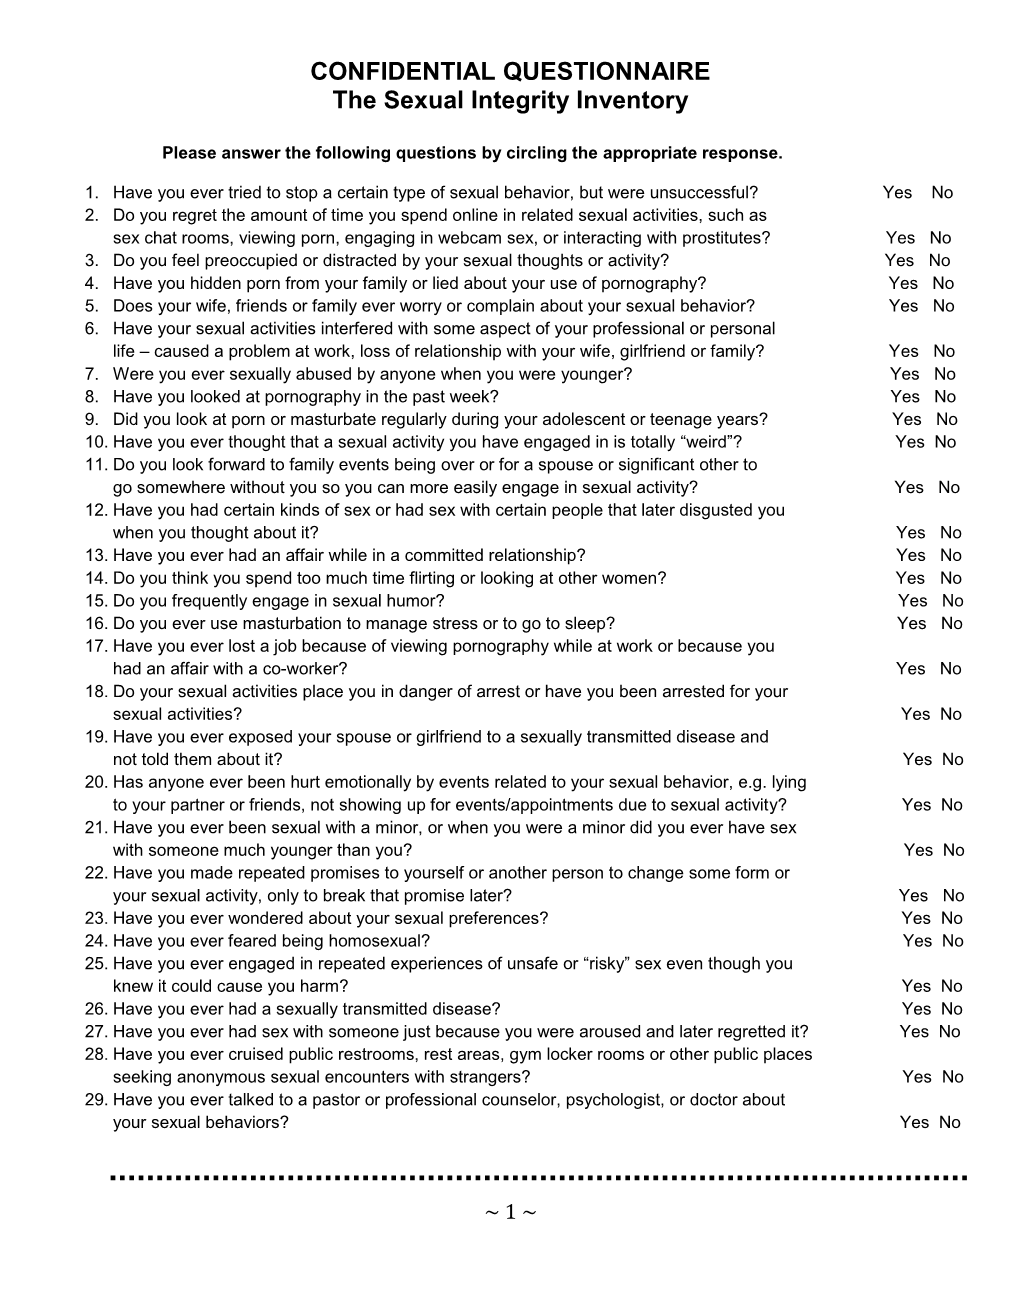 CONFIDENTIAL QUESTIONNAIRE the Sexual Integrity Inventory